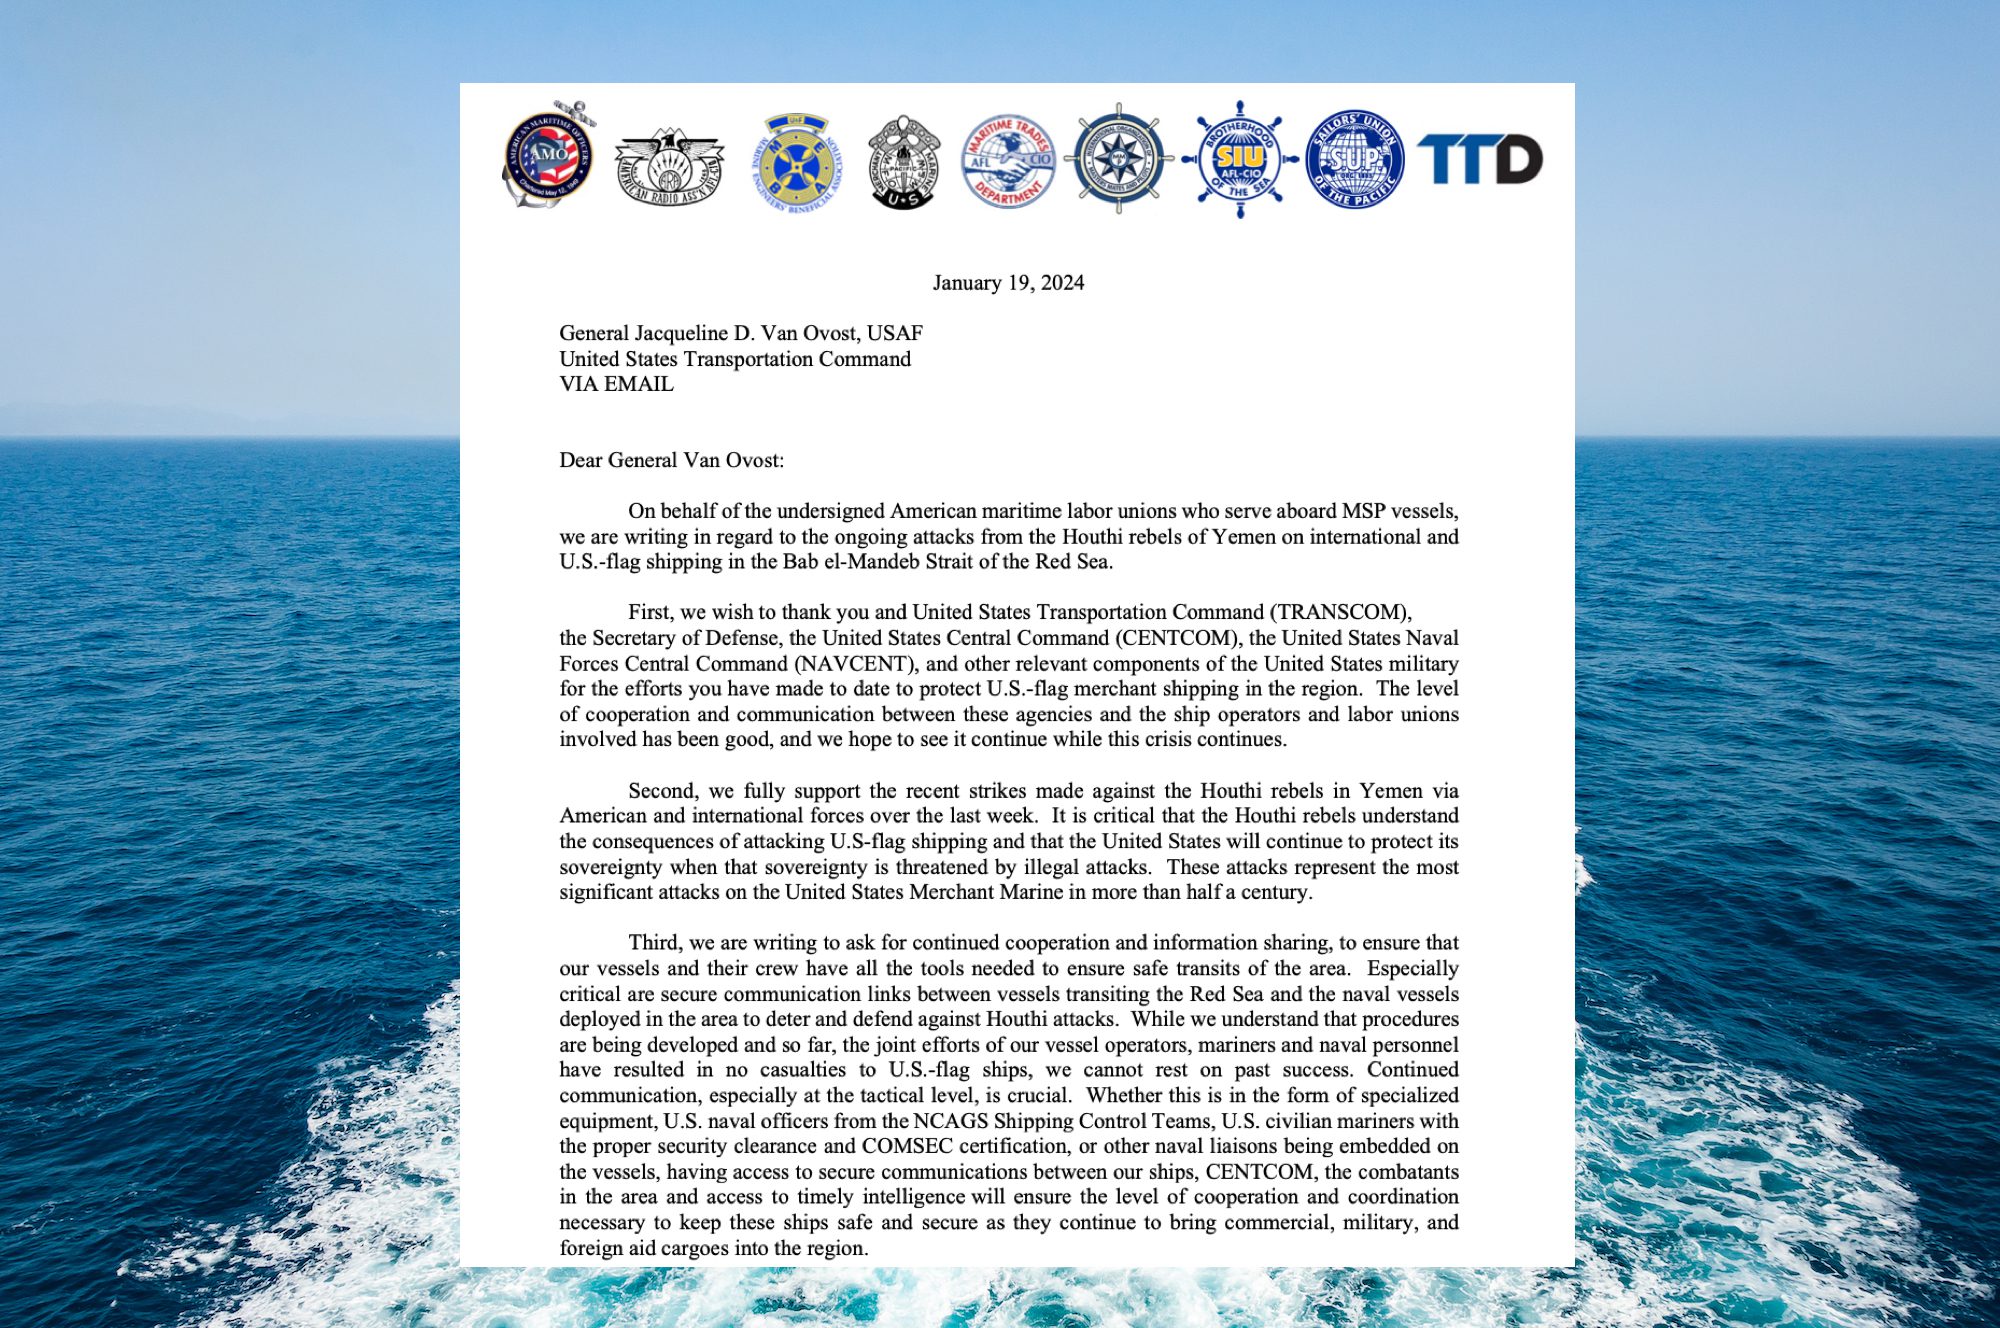 Maritime Unions Urge TRANSCOM for Enhanced Communication in Red Sea